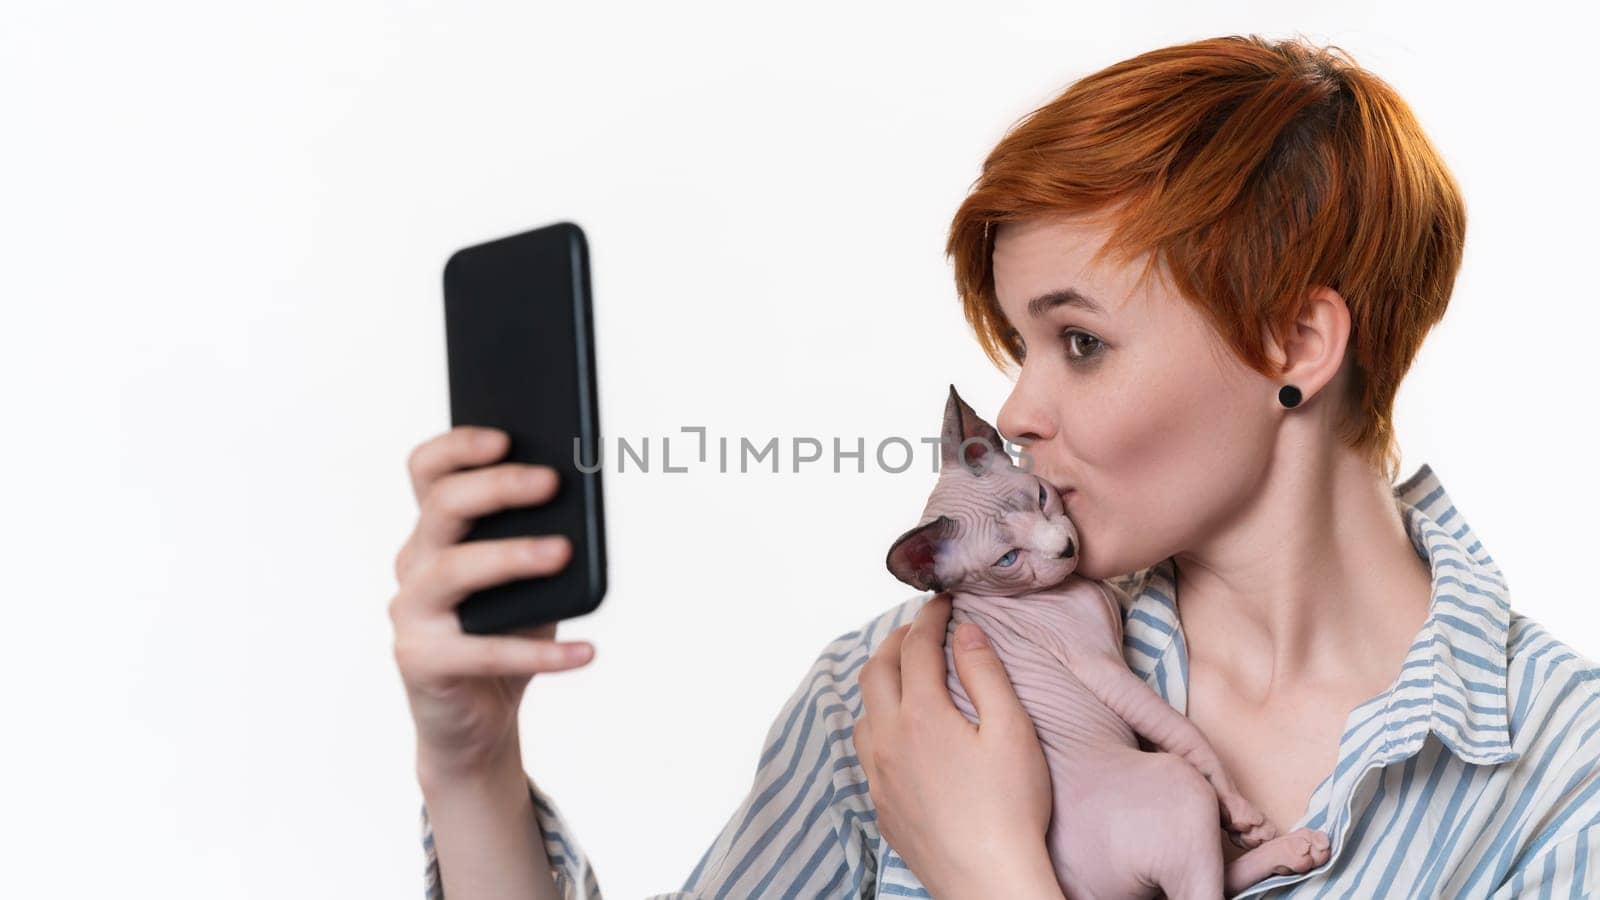 Redhead young woman holding and kissing kitten, taking selfie photo using smartphone camera. Studio shot on white background. Hipster with short hair dressed striped white-blue shirt. Part of series.